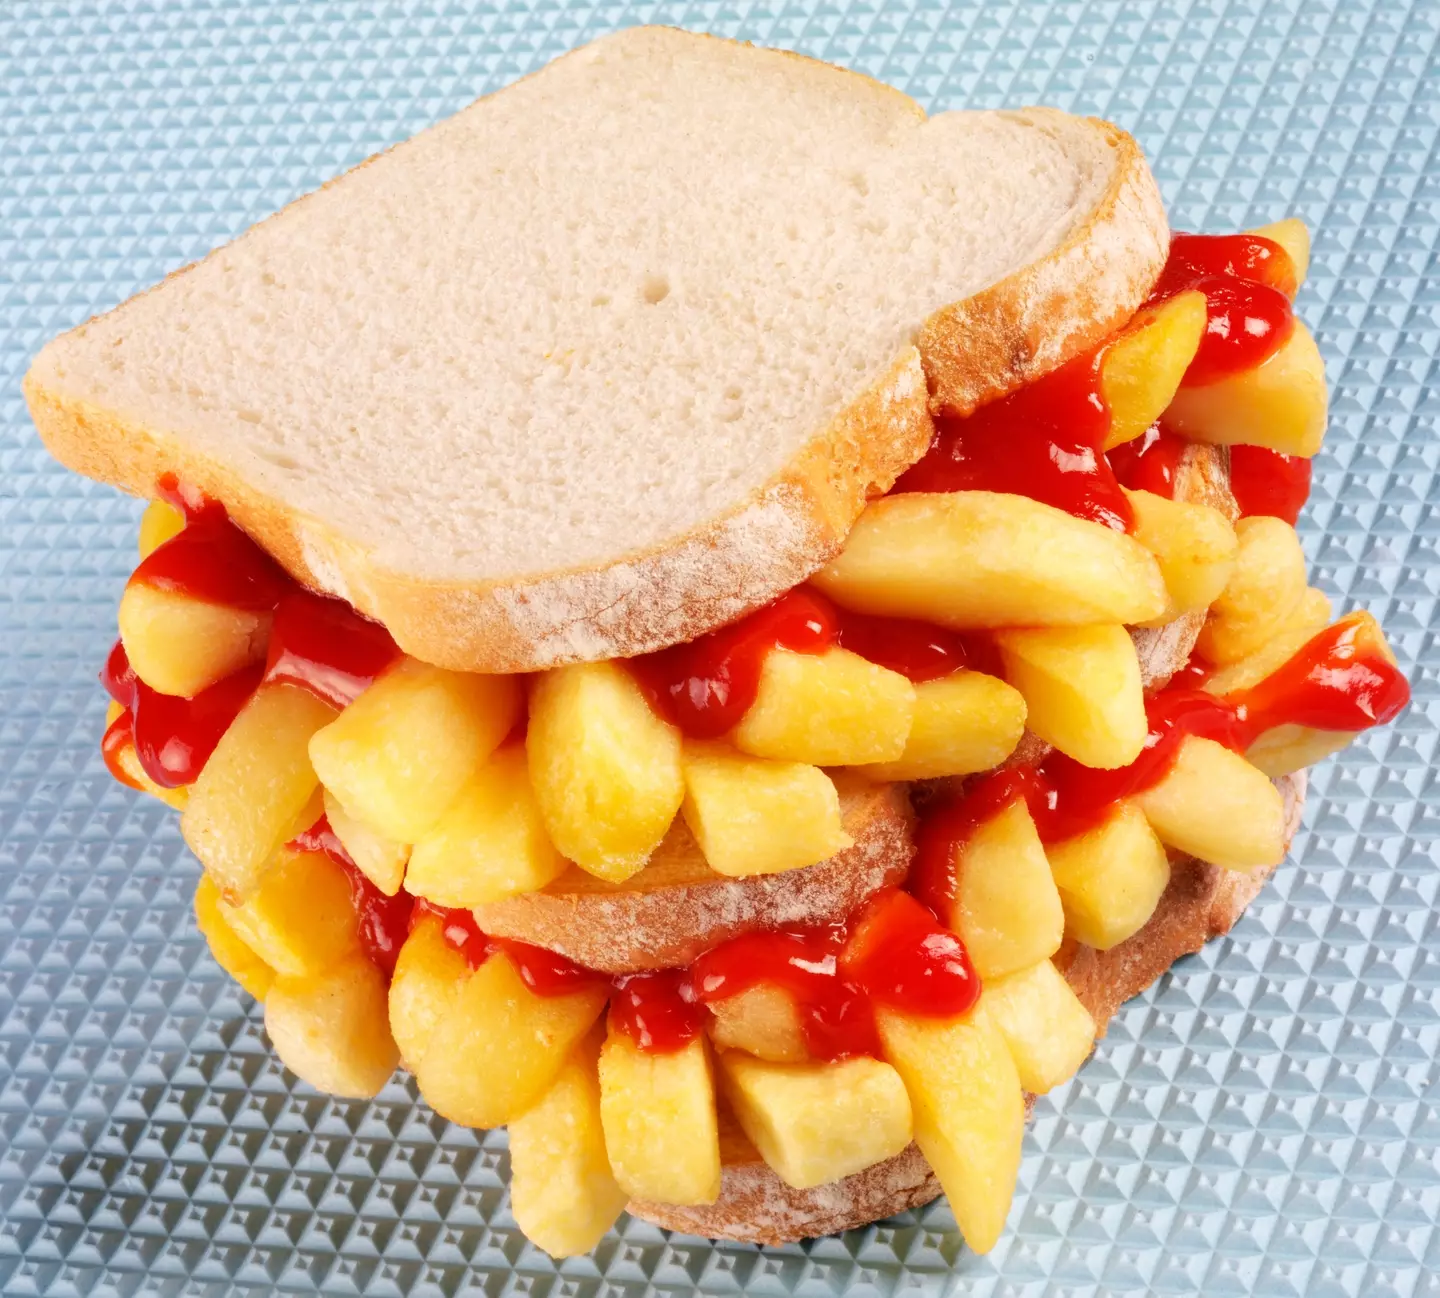 A chip butty.